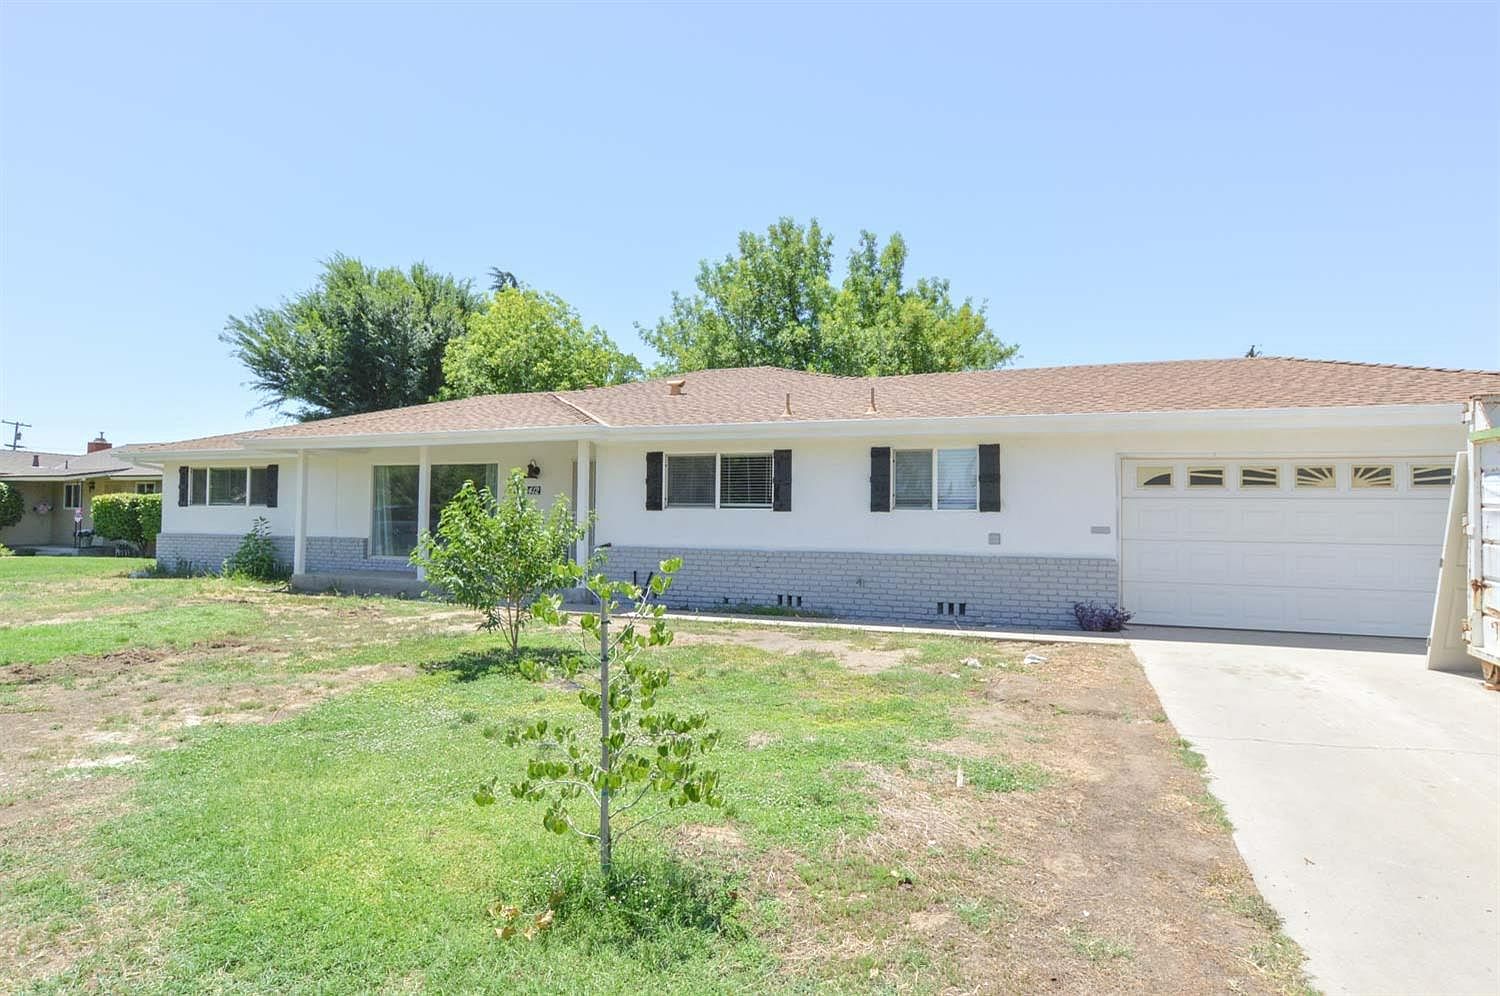 412 N Schnoor Ave, Madera, CA 93637 | Zillow